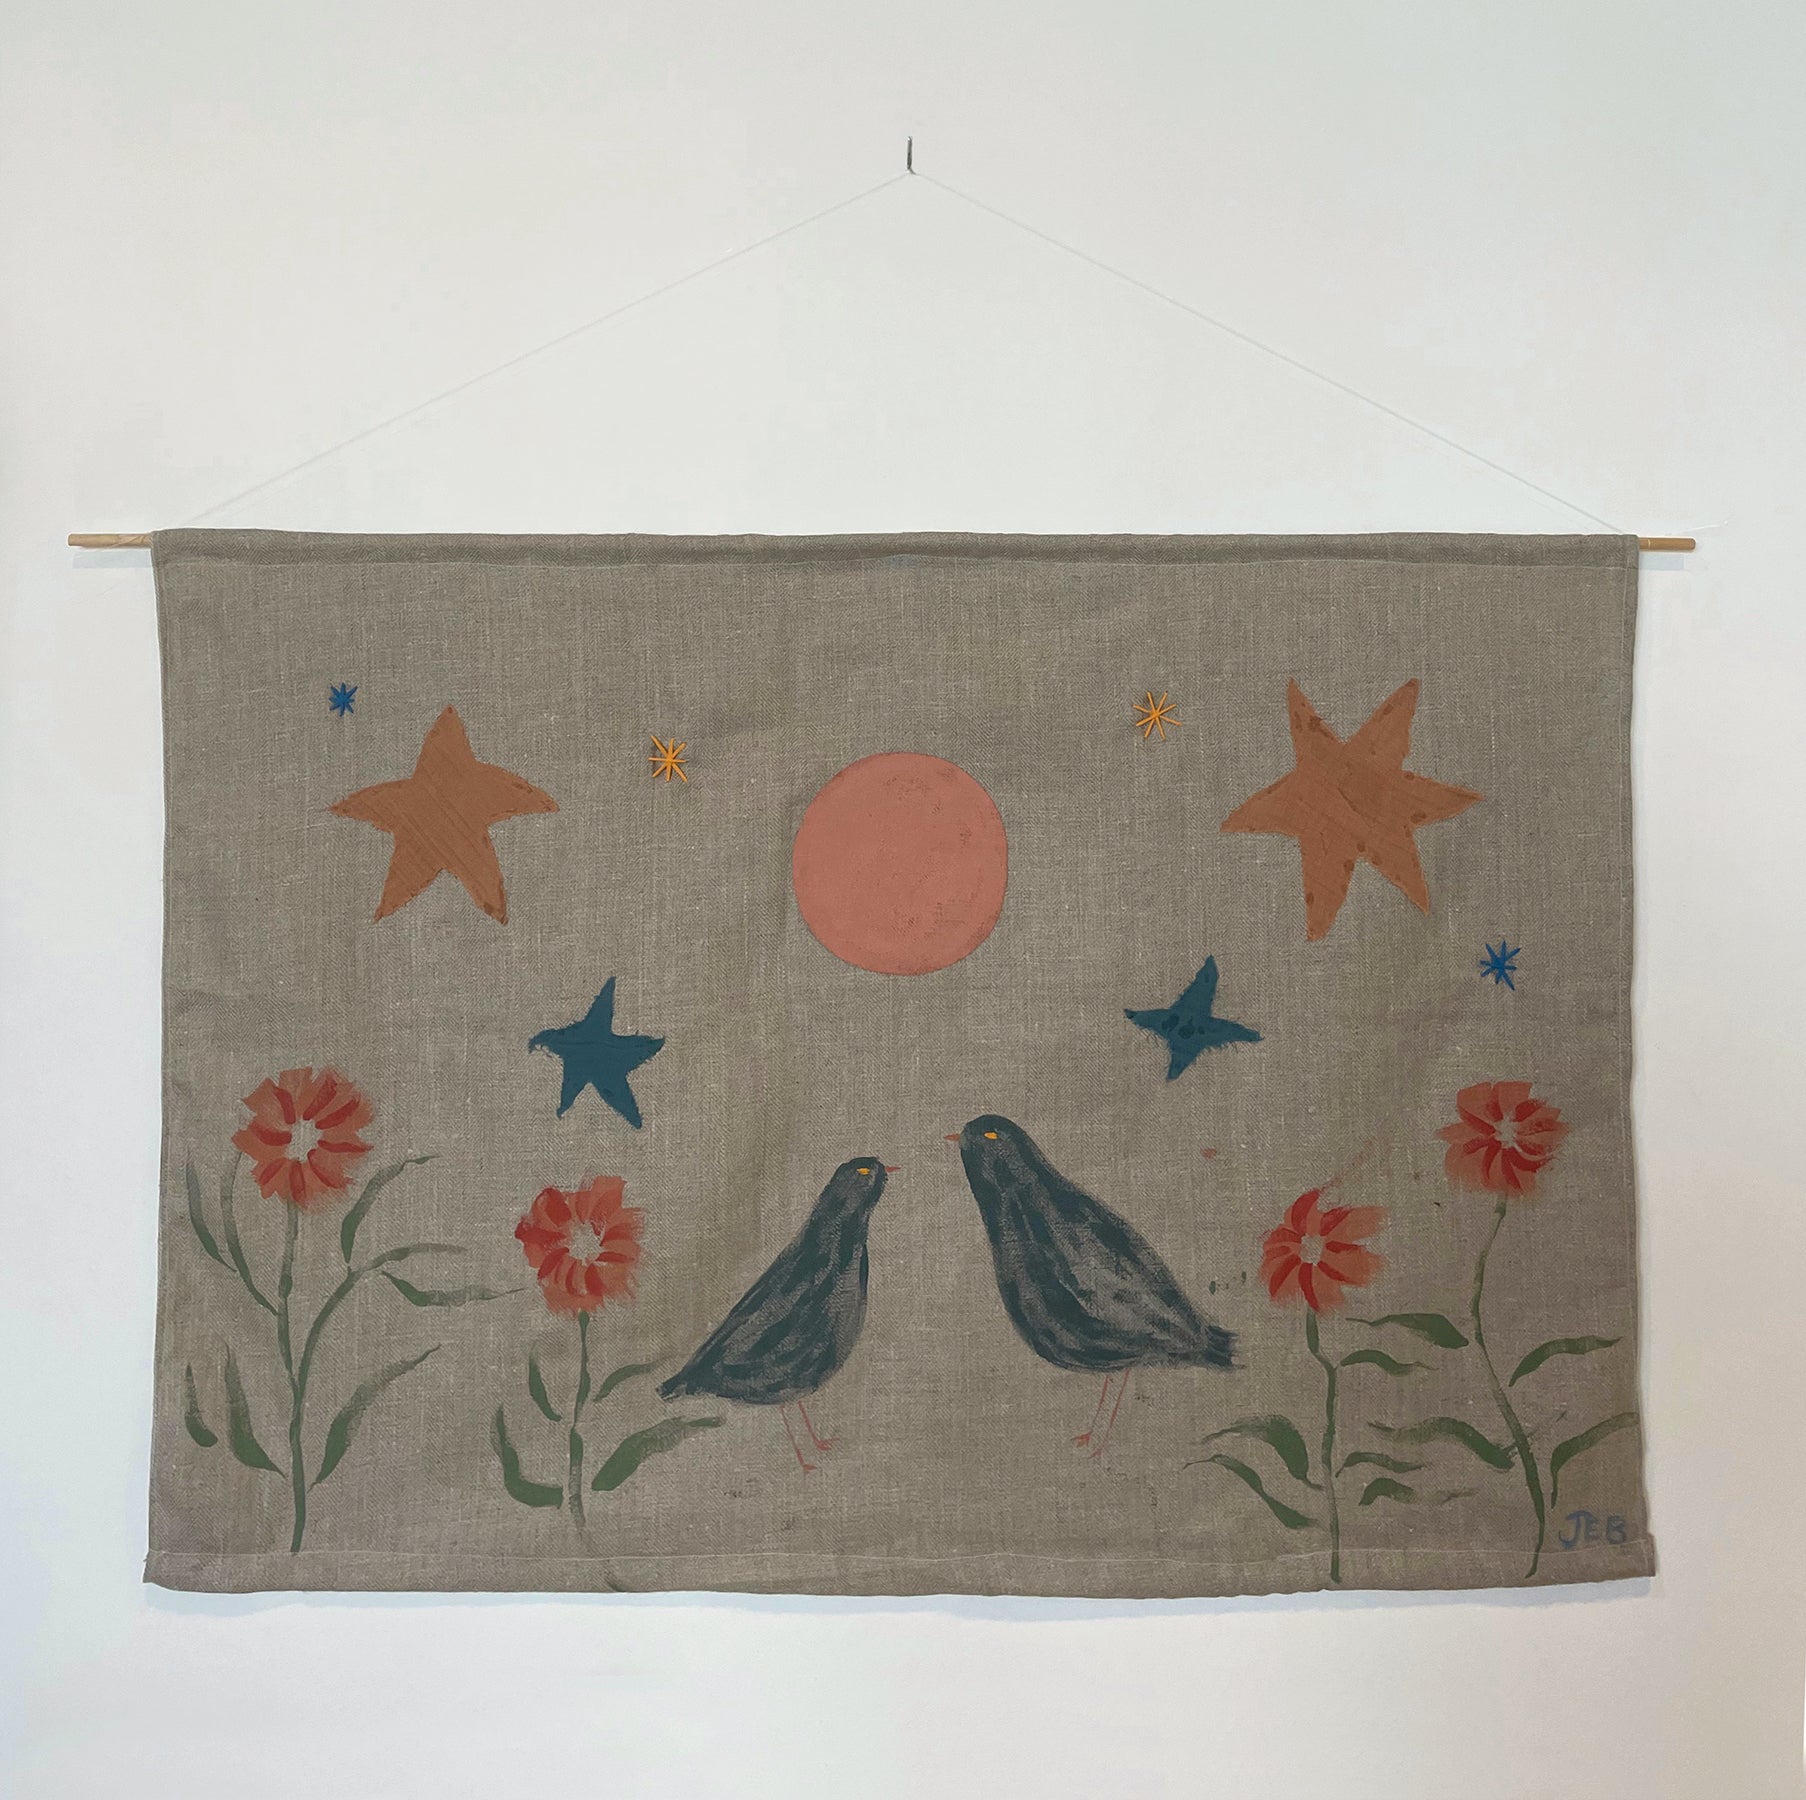 Playfully designed wall hanging by the rising artist Julianna Byrne titled Blackbirds and Dahlia Moon.